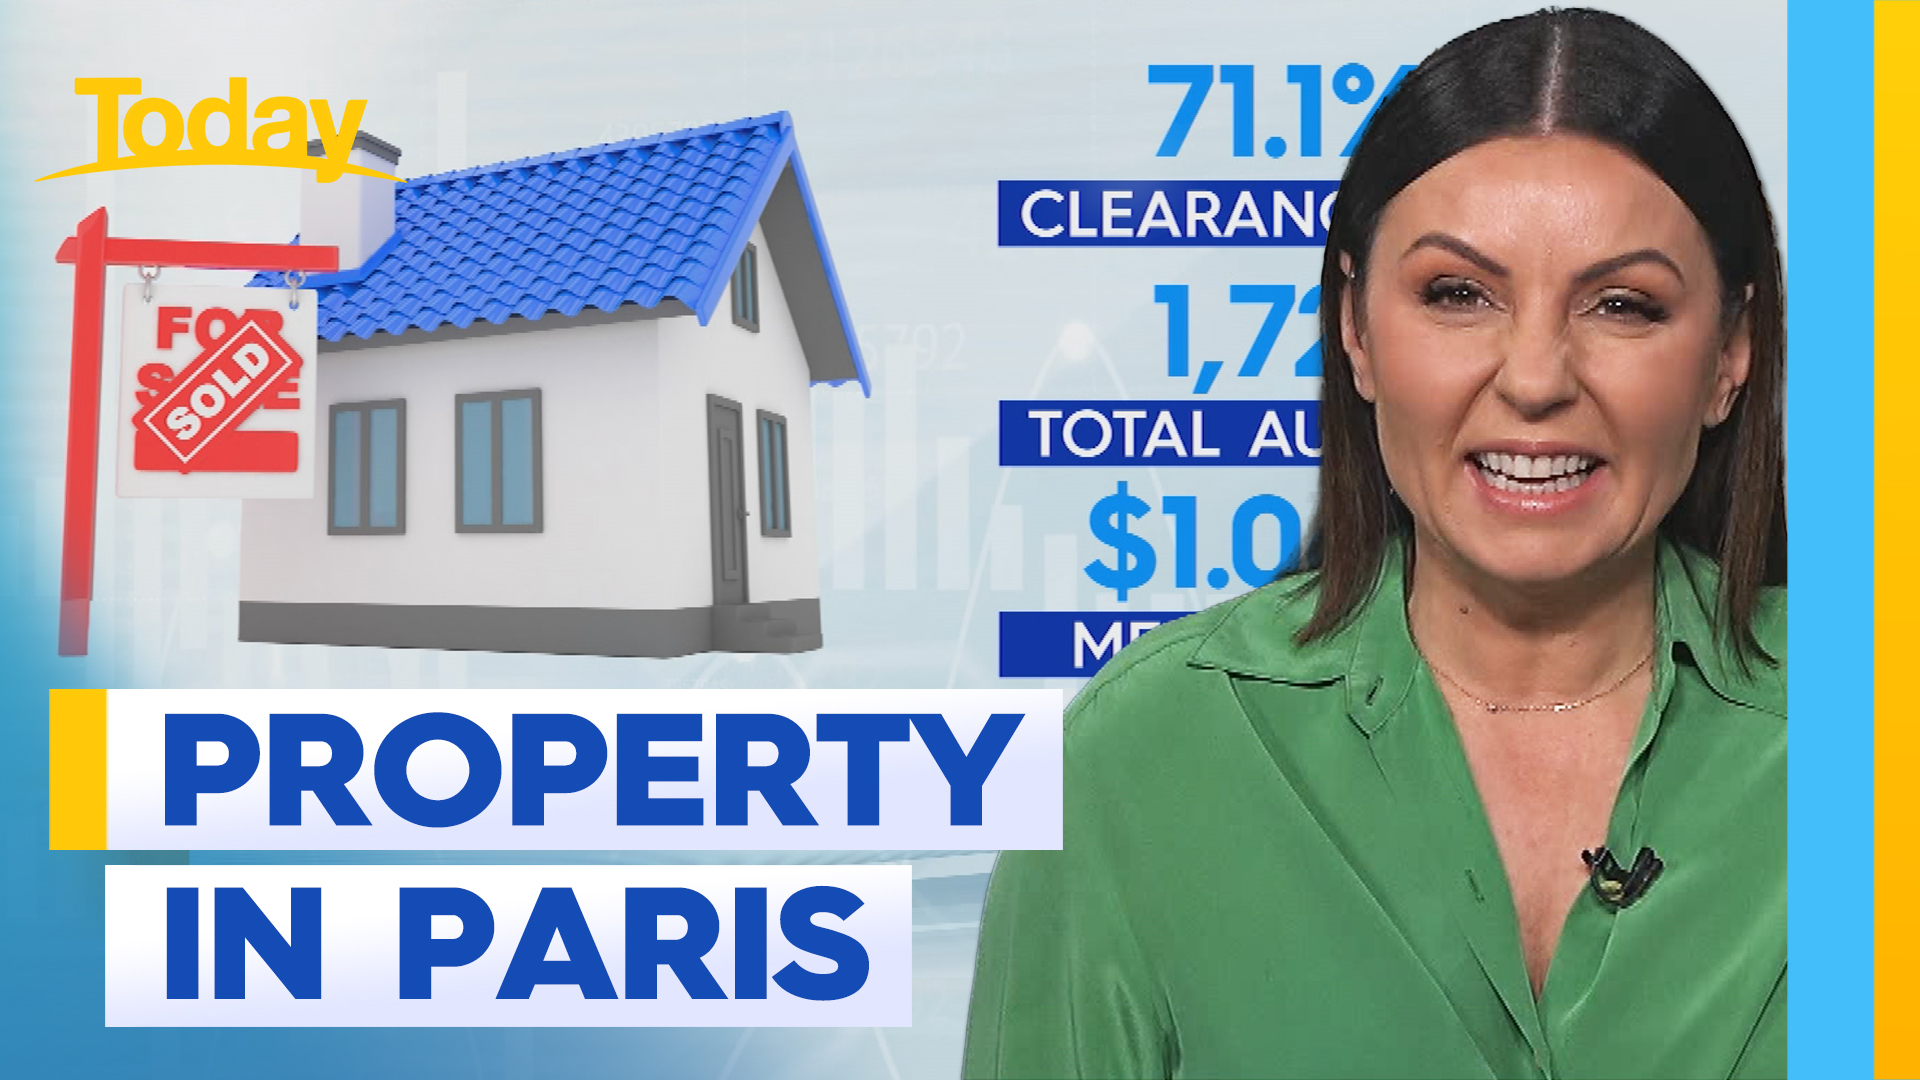 How do house prices compare in Paris?